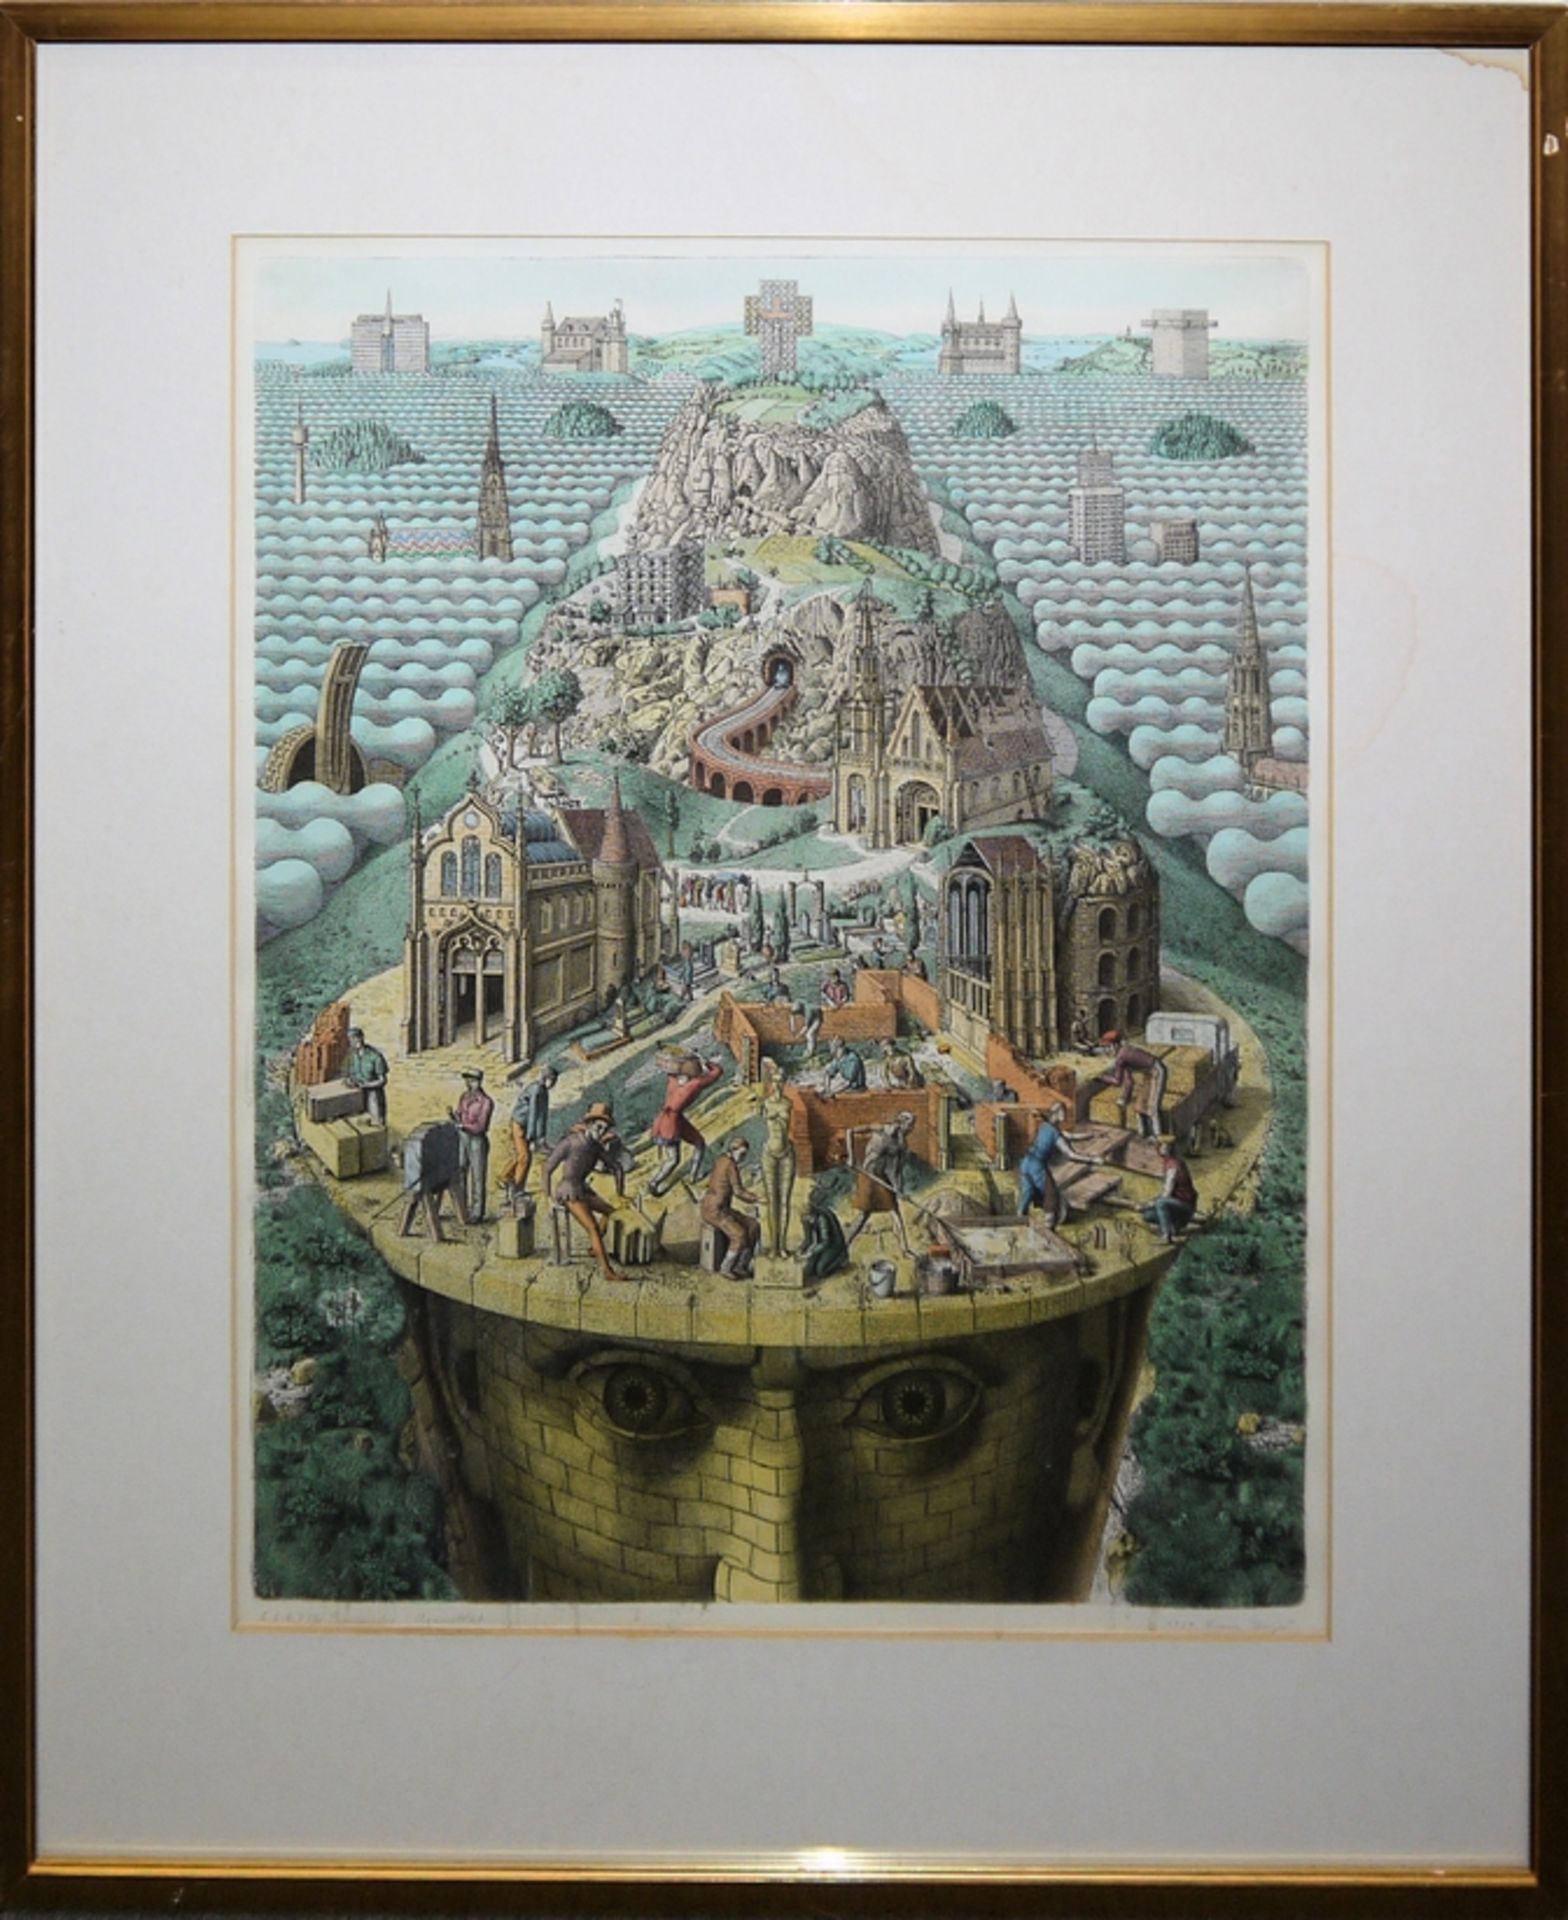 Franz Bayer, "Der Baumeister", large, hand watercoloured etching from 1969, signed, framed